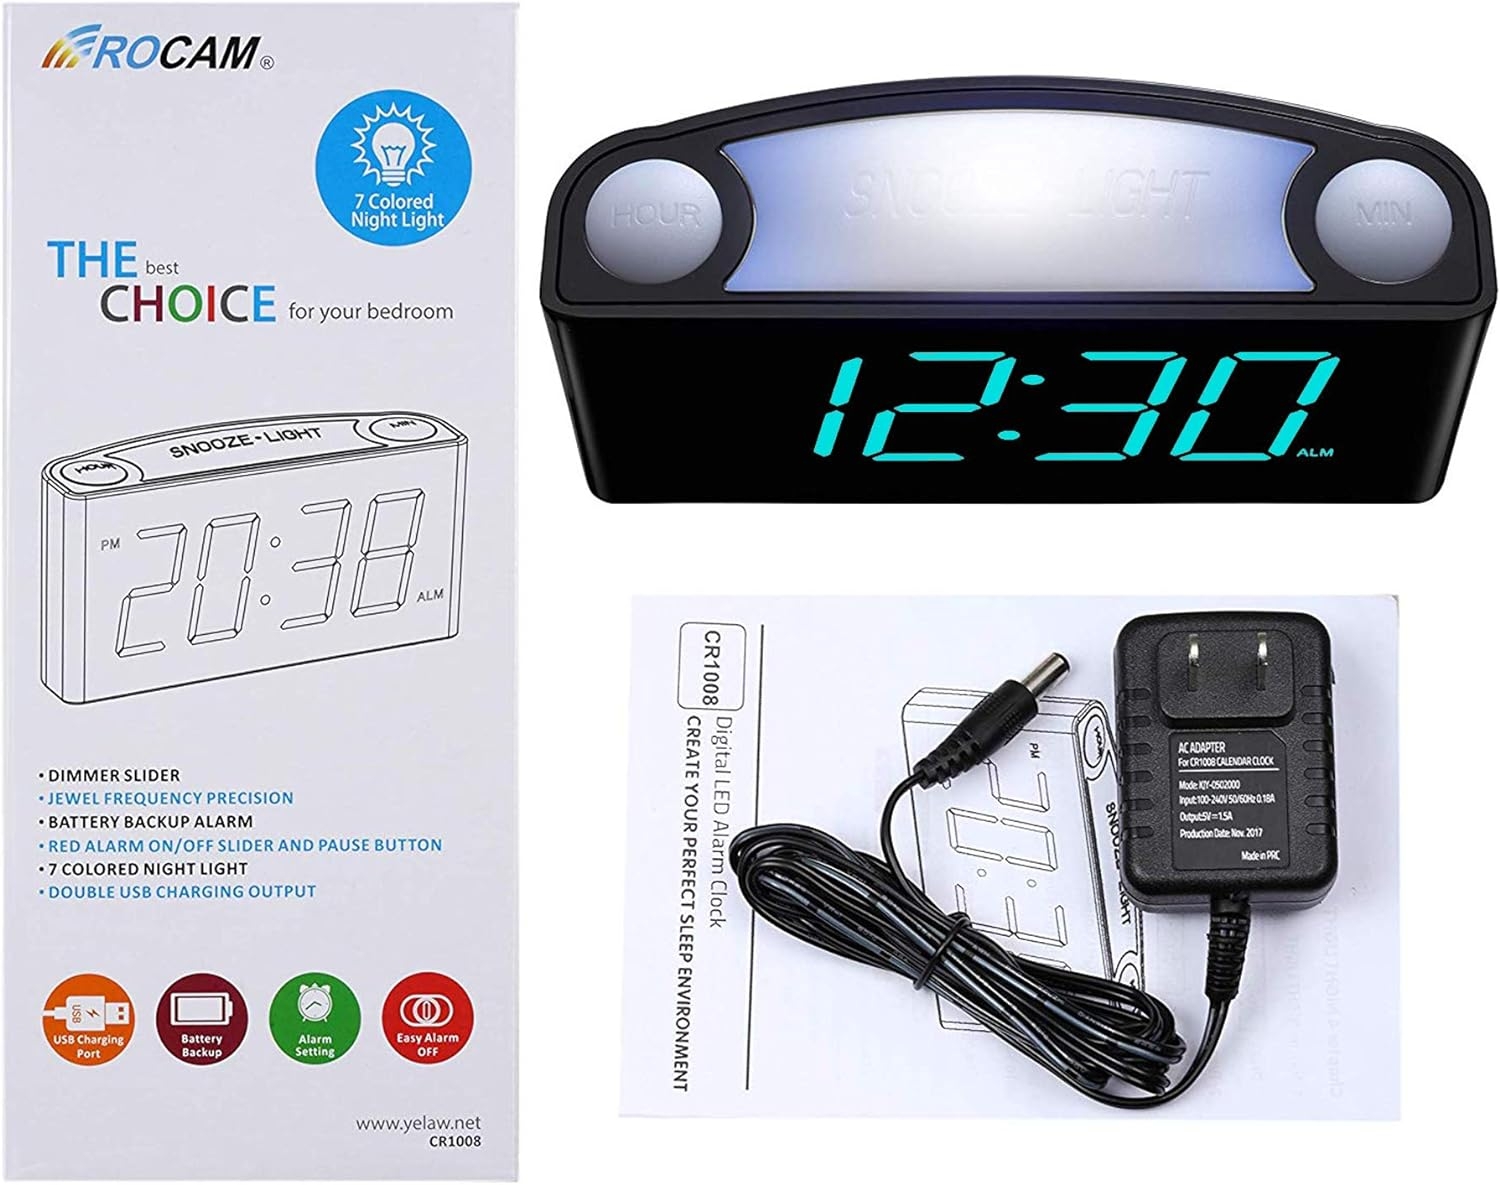 Rocam Digital Alarm Clock for Bedrooms - Large 7" LED Display with Dimmer, Snooze, 7 Color Night Light, Easy to Set, USB Chargers, Battery Backup, 12/24 Hour for Kids, Boys, Heavy Sleepers(Blue)